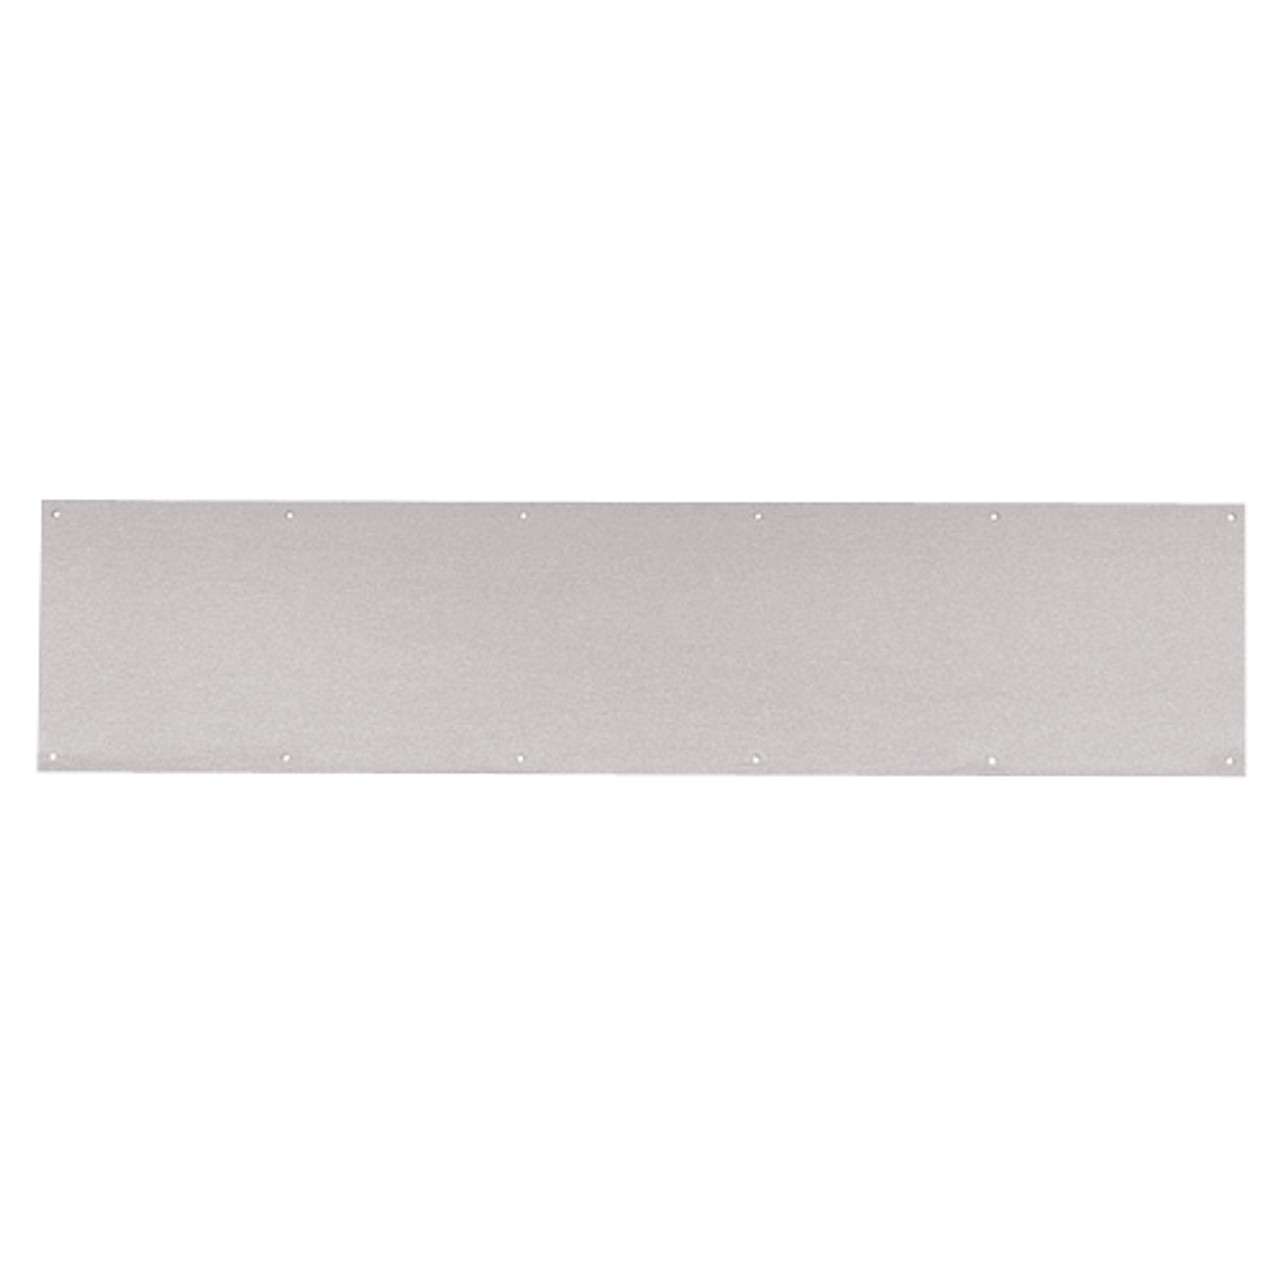 8400-US32D-12x43-B-CS Ives 8400 Series Protection Plate in Satin Stainless Steel